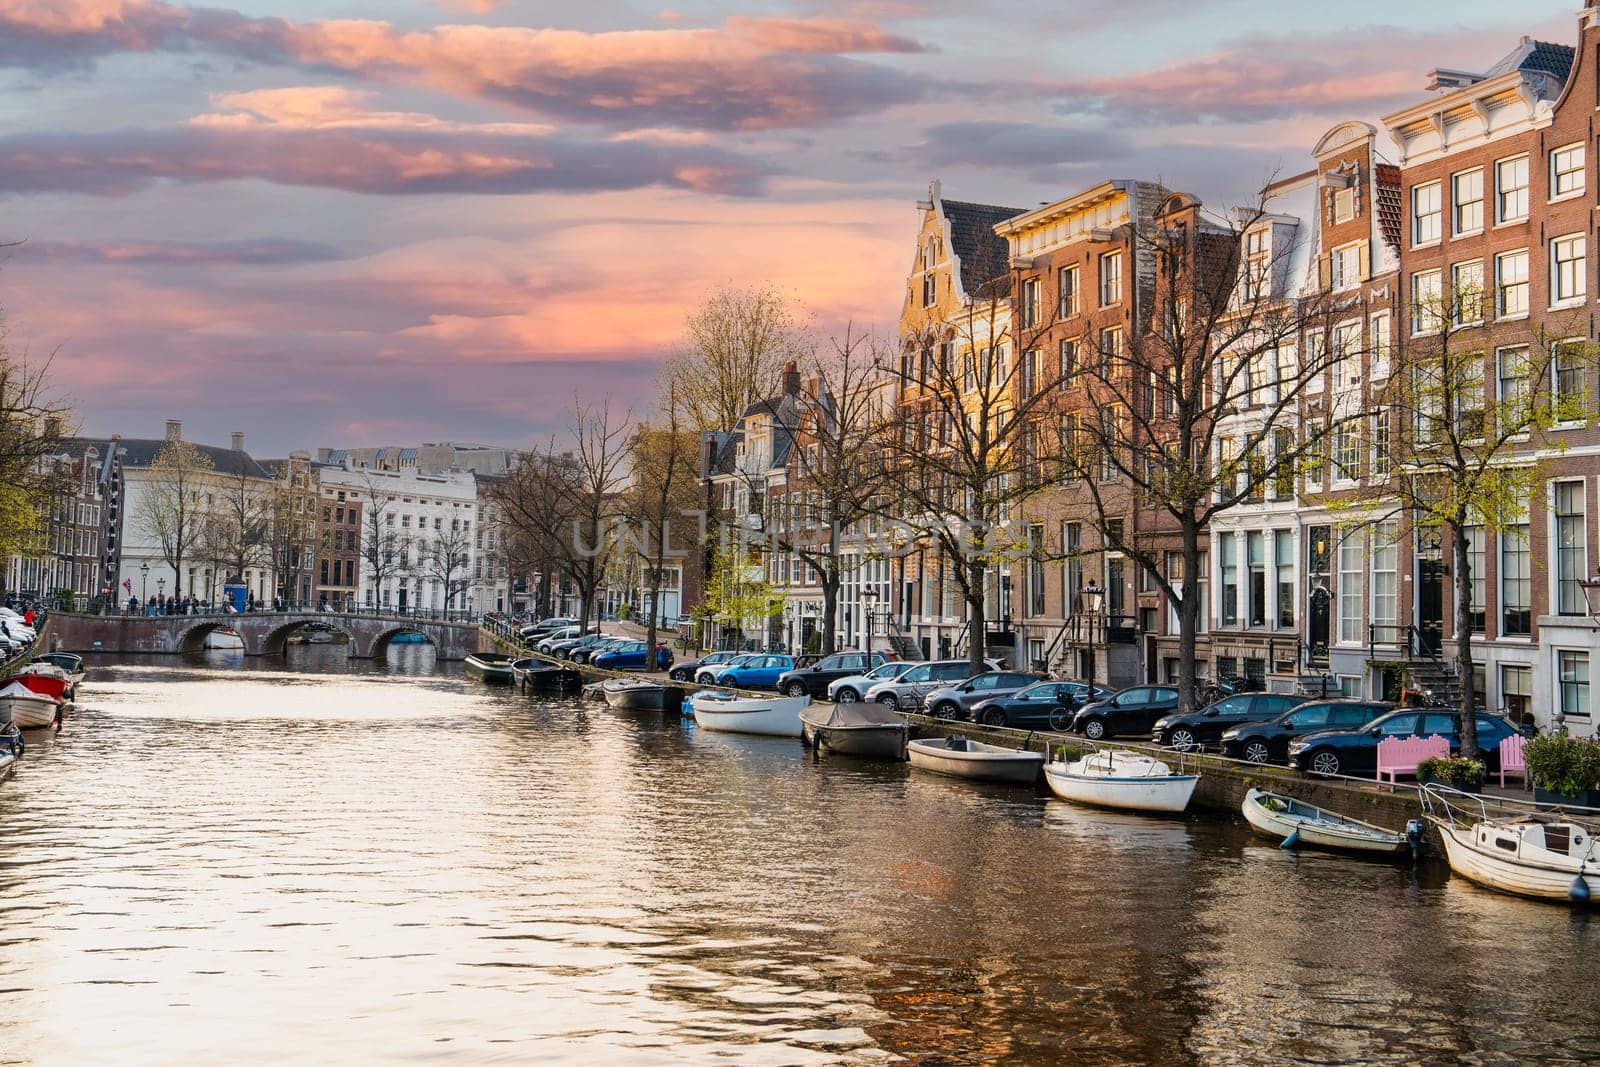 Beautiful view of Amsterdam canals with traditional Dutch houses in the historic district, showcasing the vibrant colors of the buildings reflected in the tranquil water.